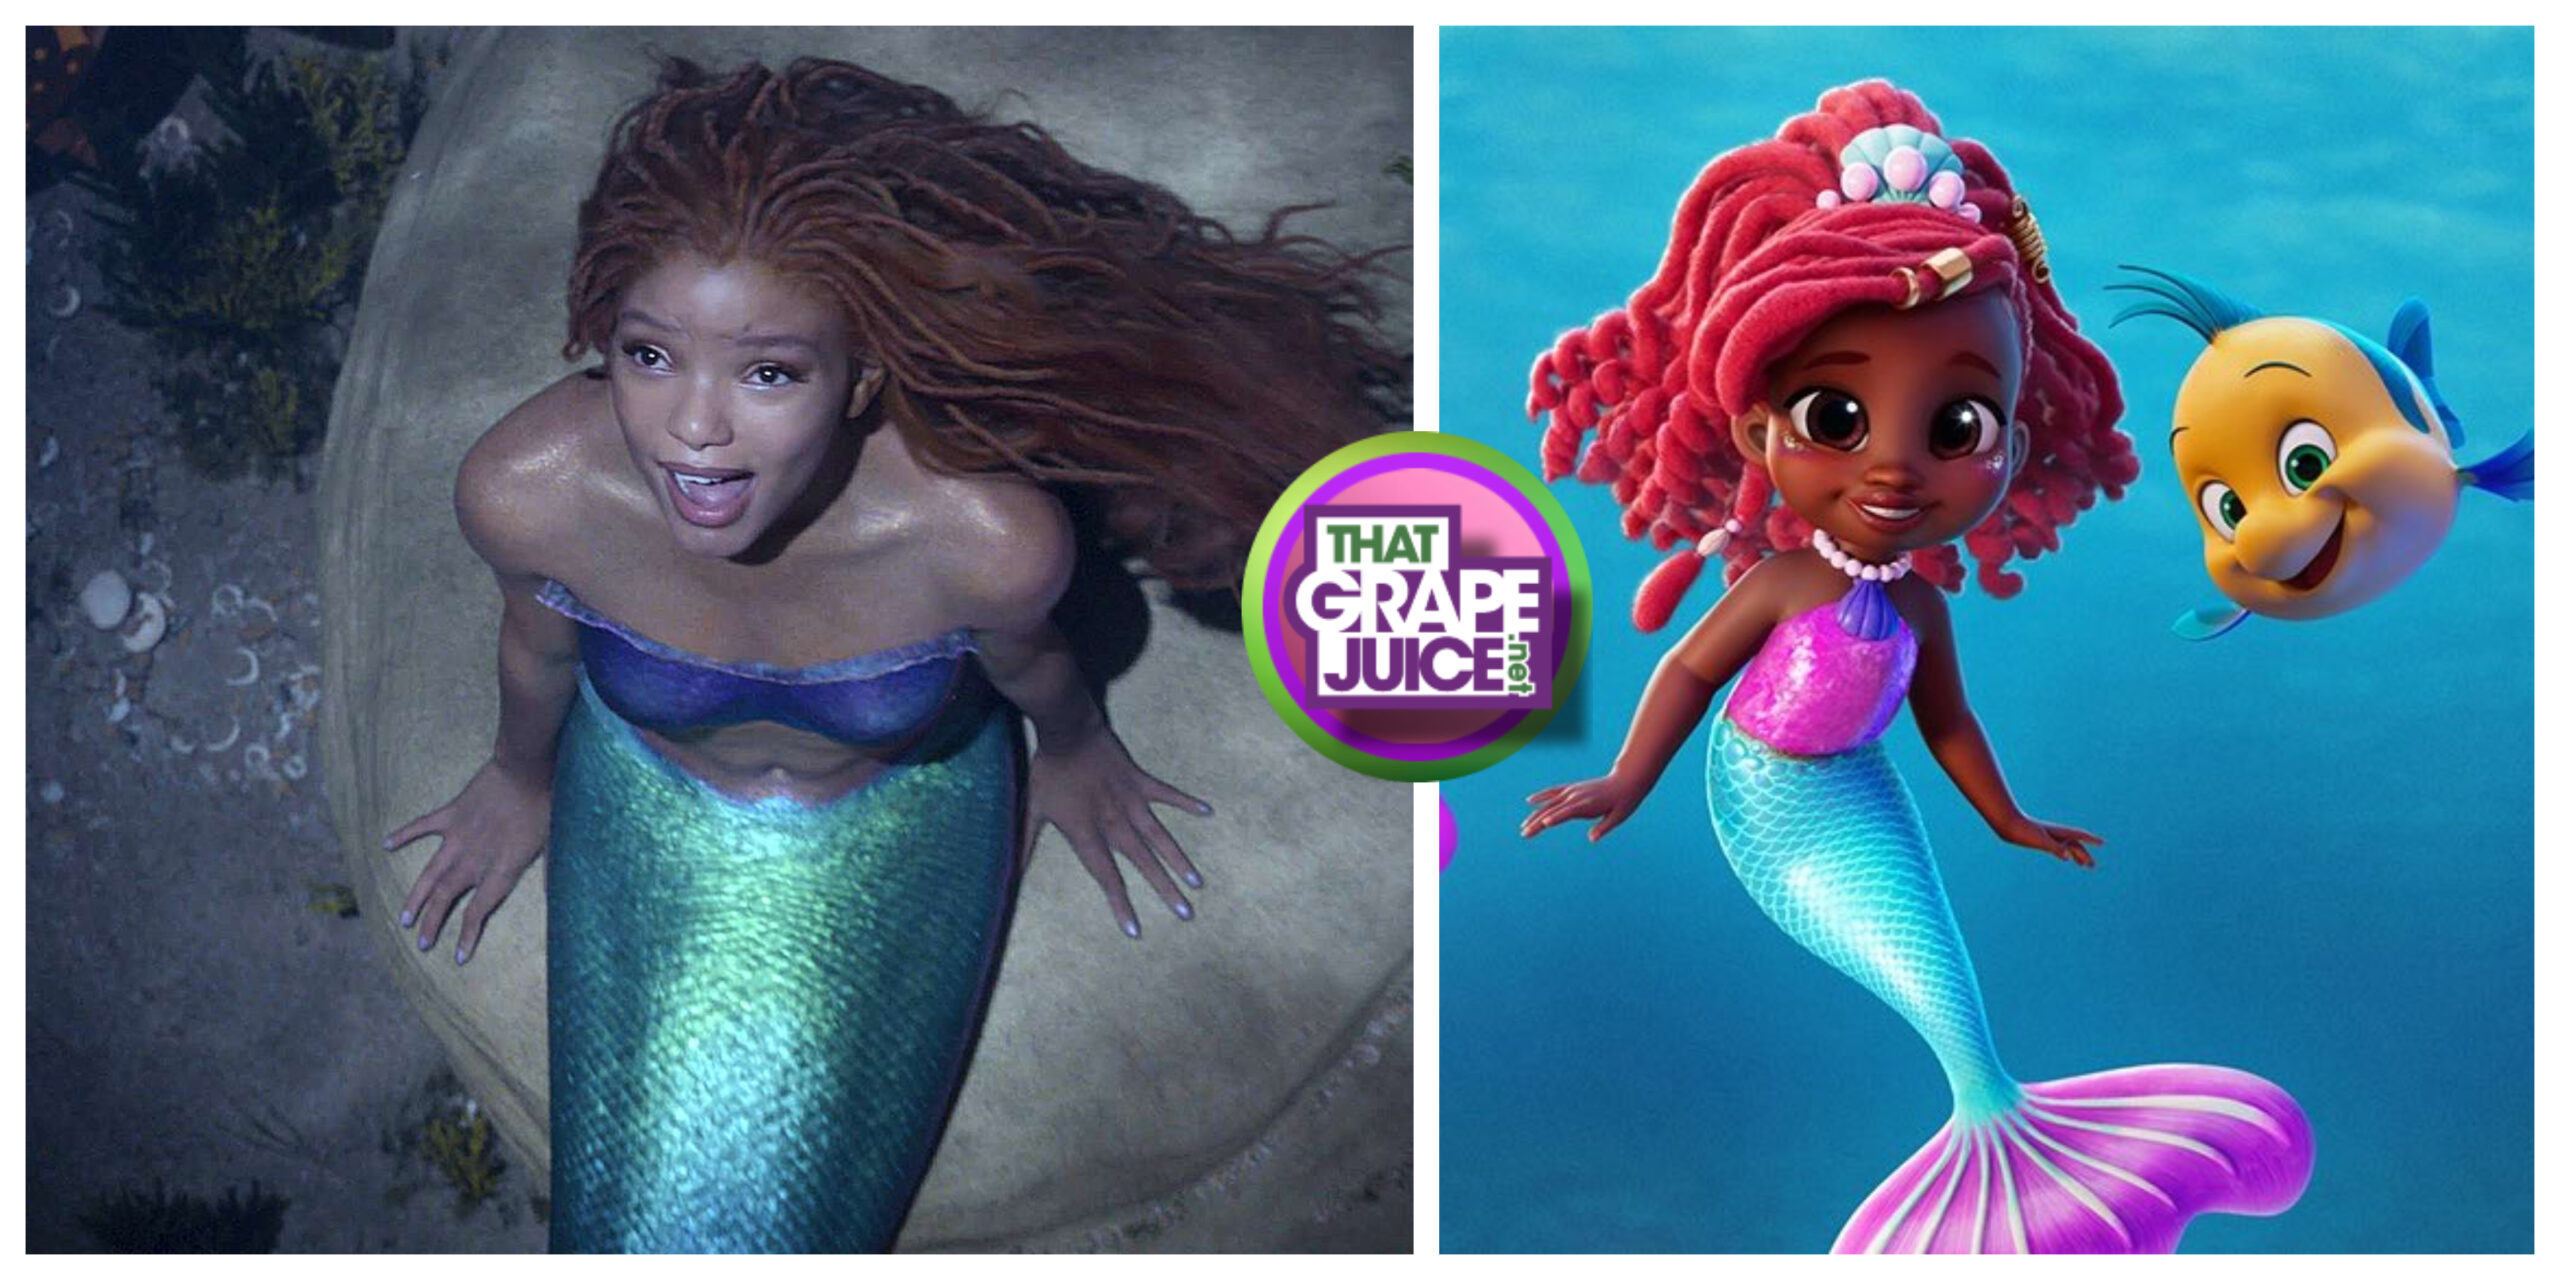 Report: ‘Little Mermaid’ Animated Series with Black Ariel Greenlit at Disney After Success of Halle Bailey-Led Film